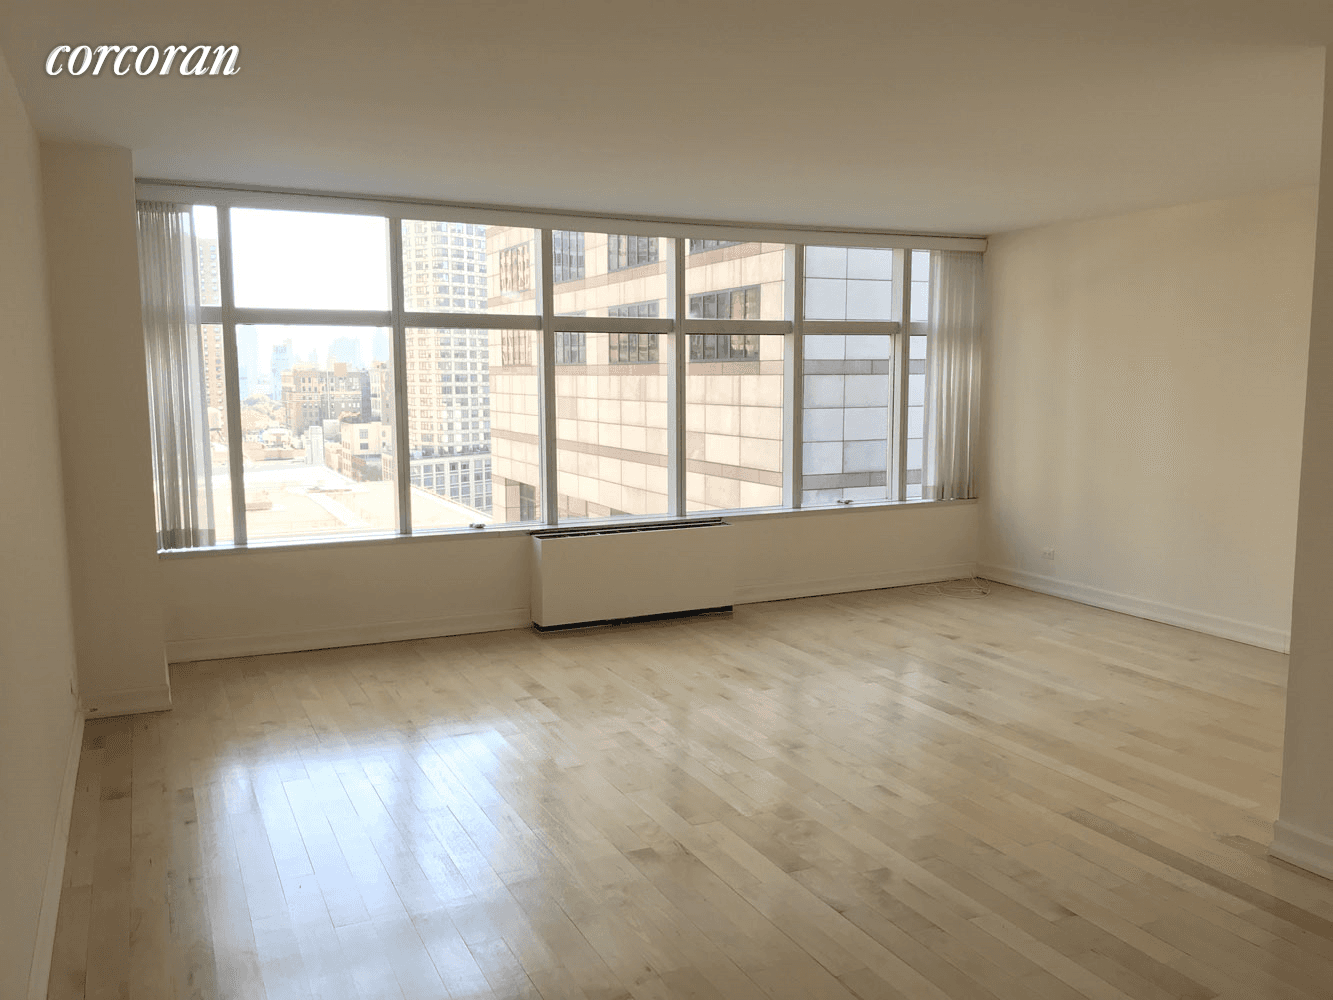 Deluxe One Bedroom at 3 Lincoln Center ; a full service modern condo with amenities !